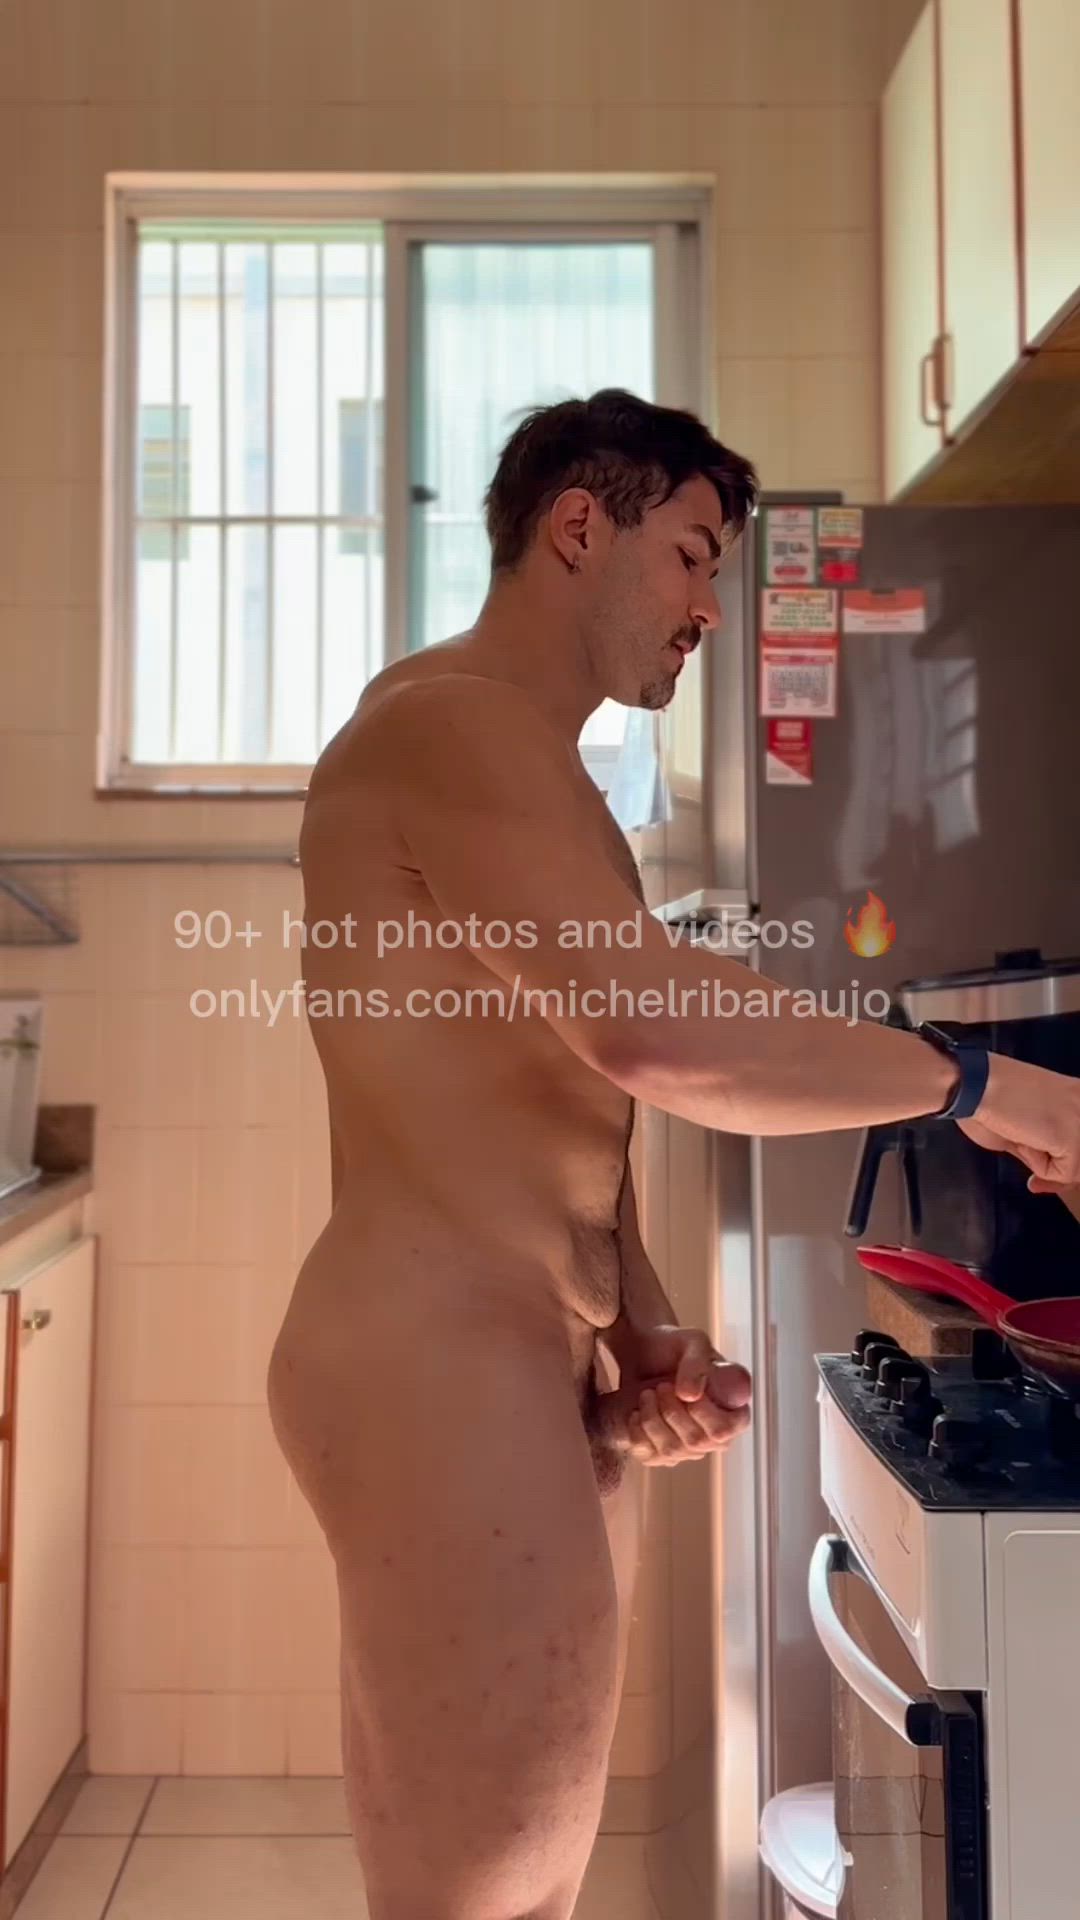 Amateur porn video with onlyfans model Michel Ribeiro Araujo <strong>@michelribaraujo</strong>